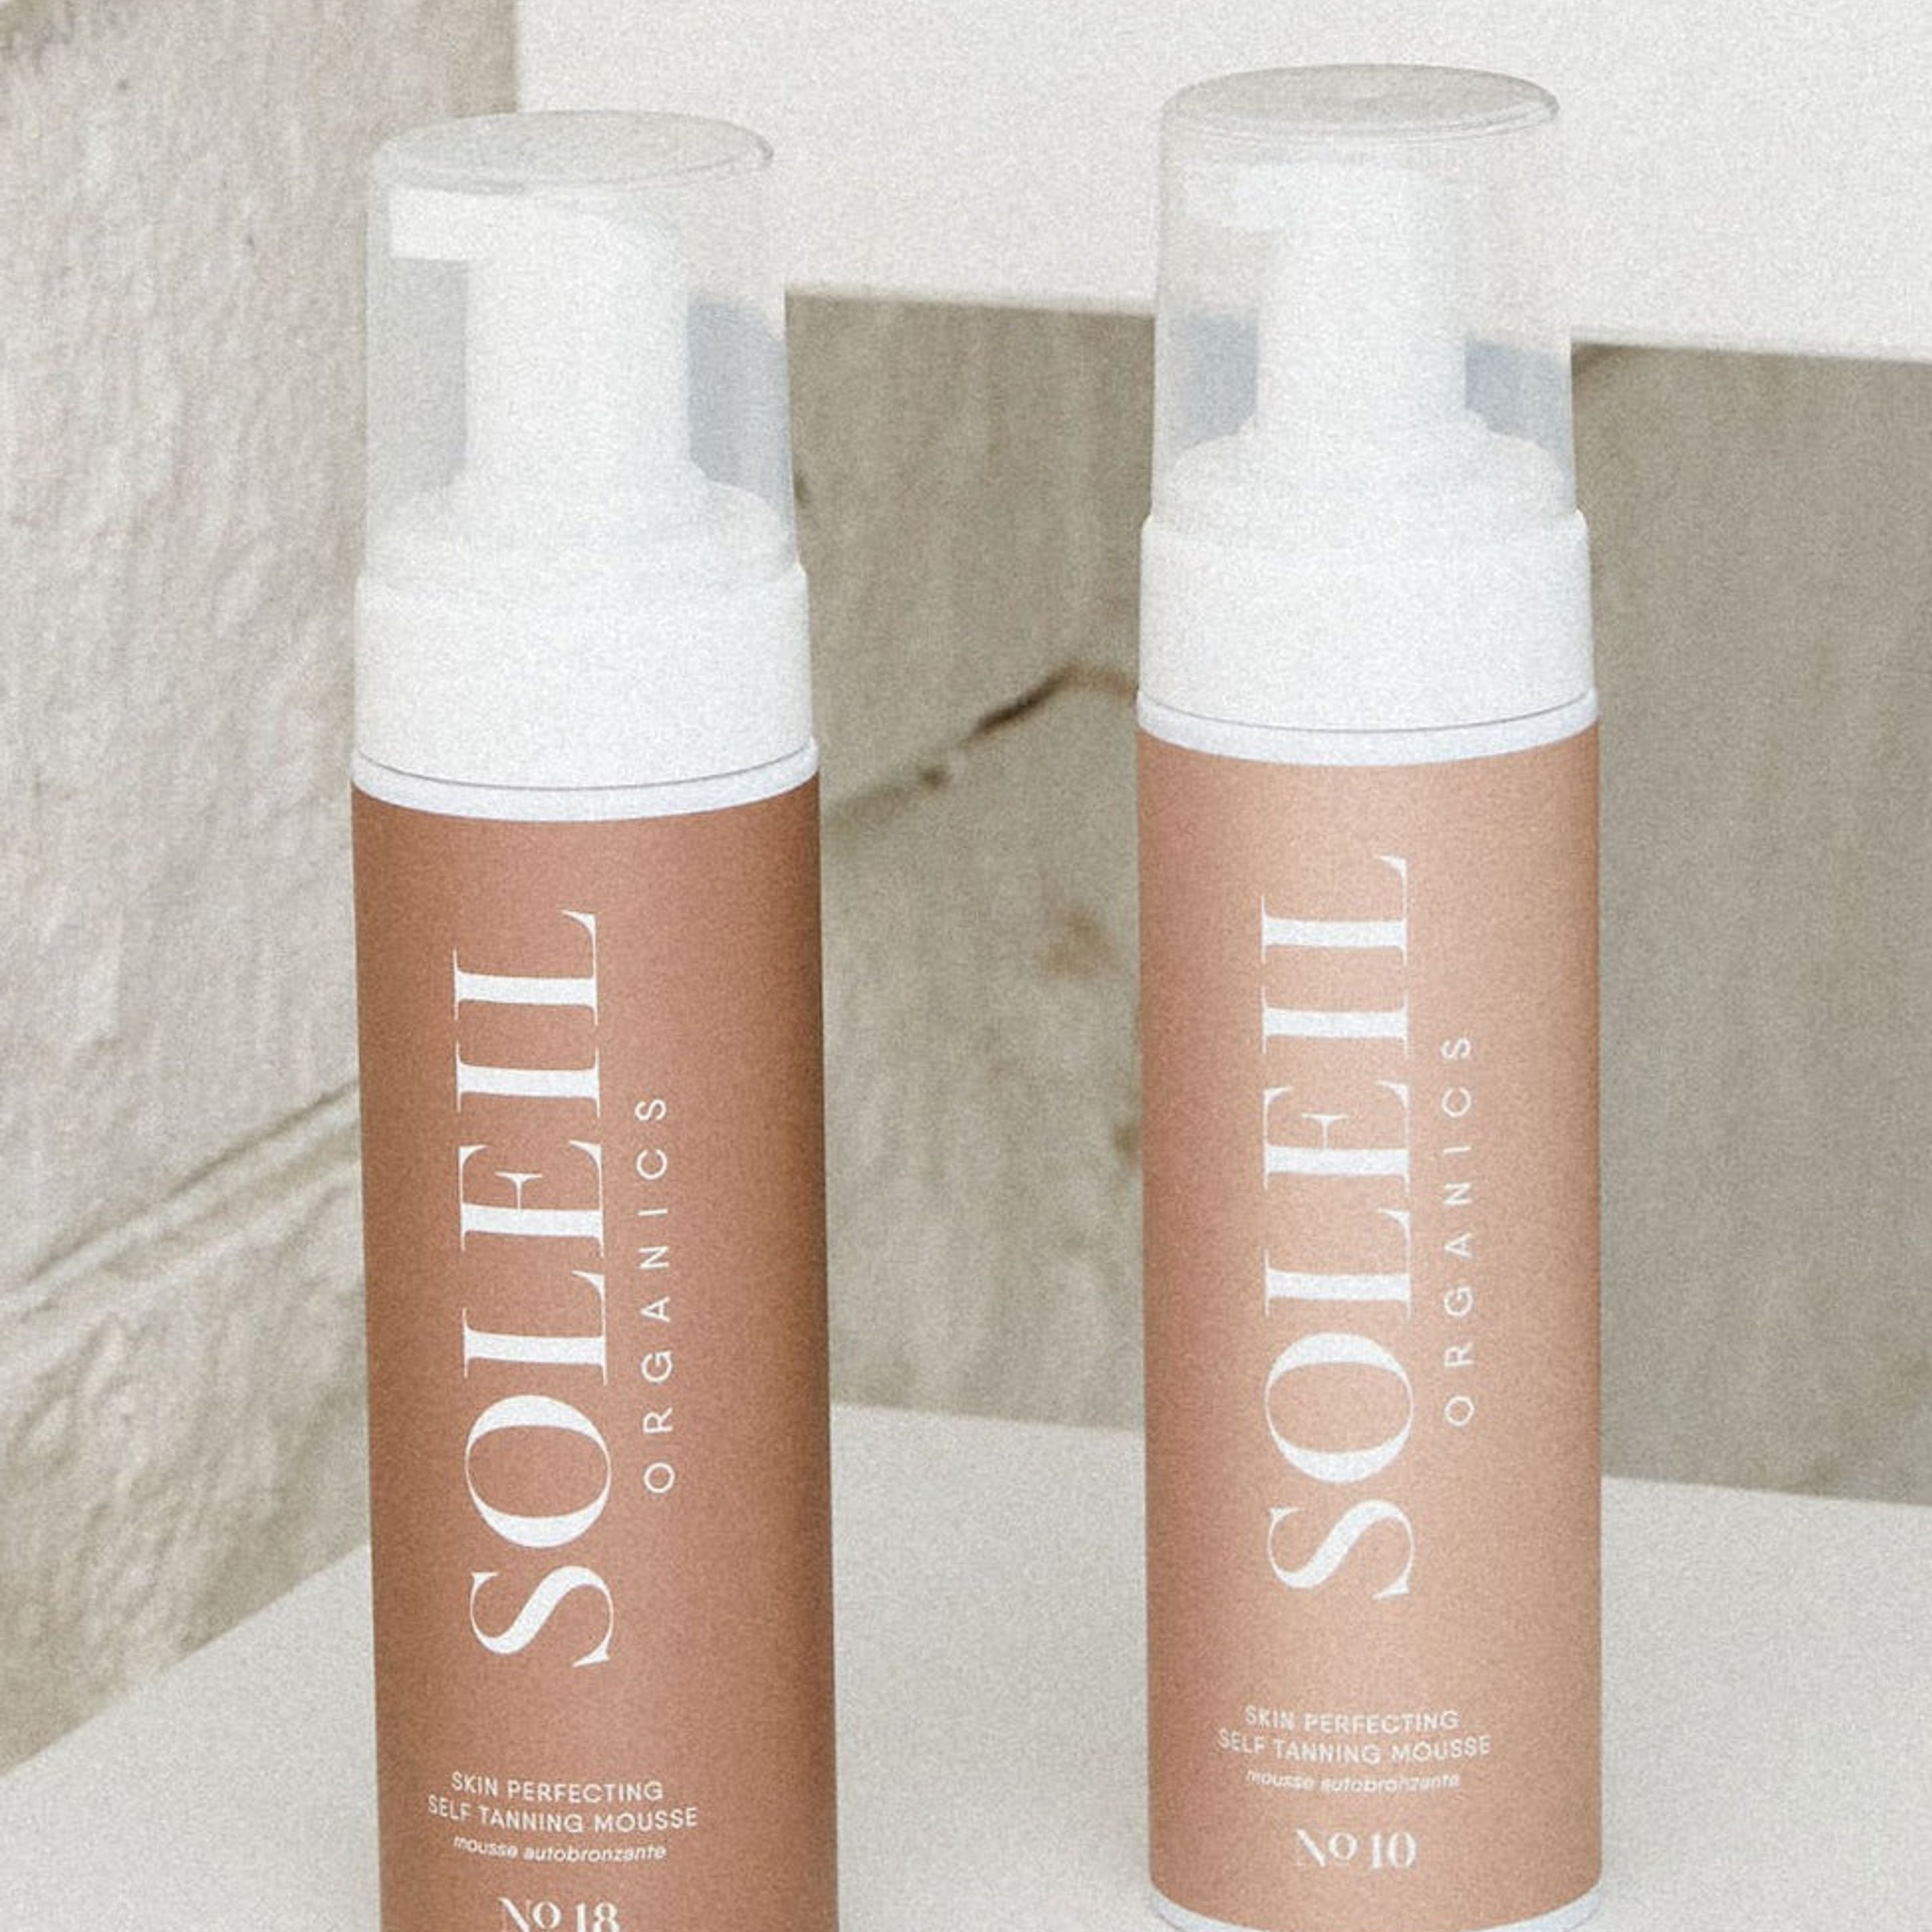 The Skin Perfecting Bronzing Mousse